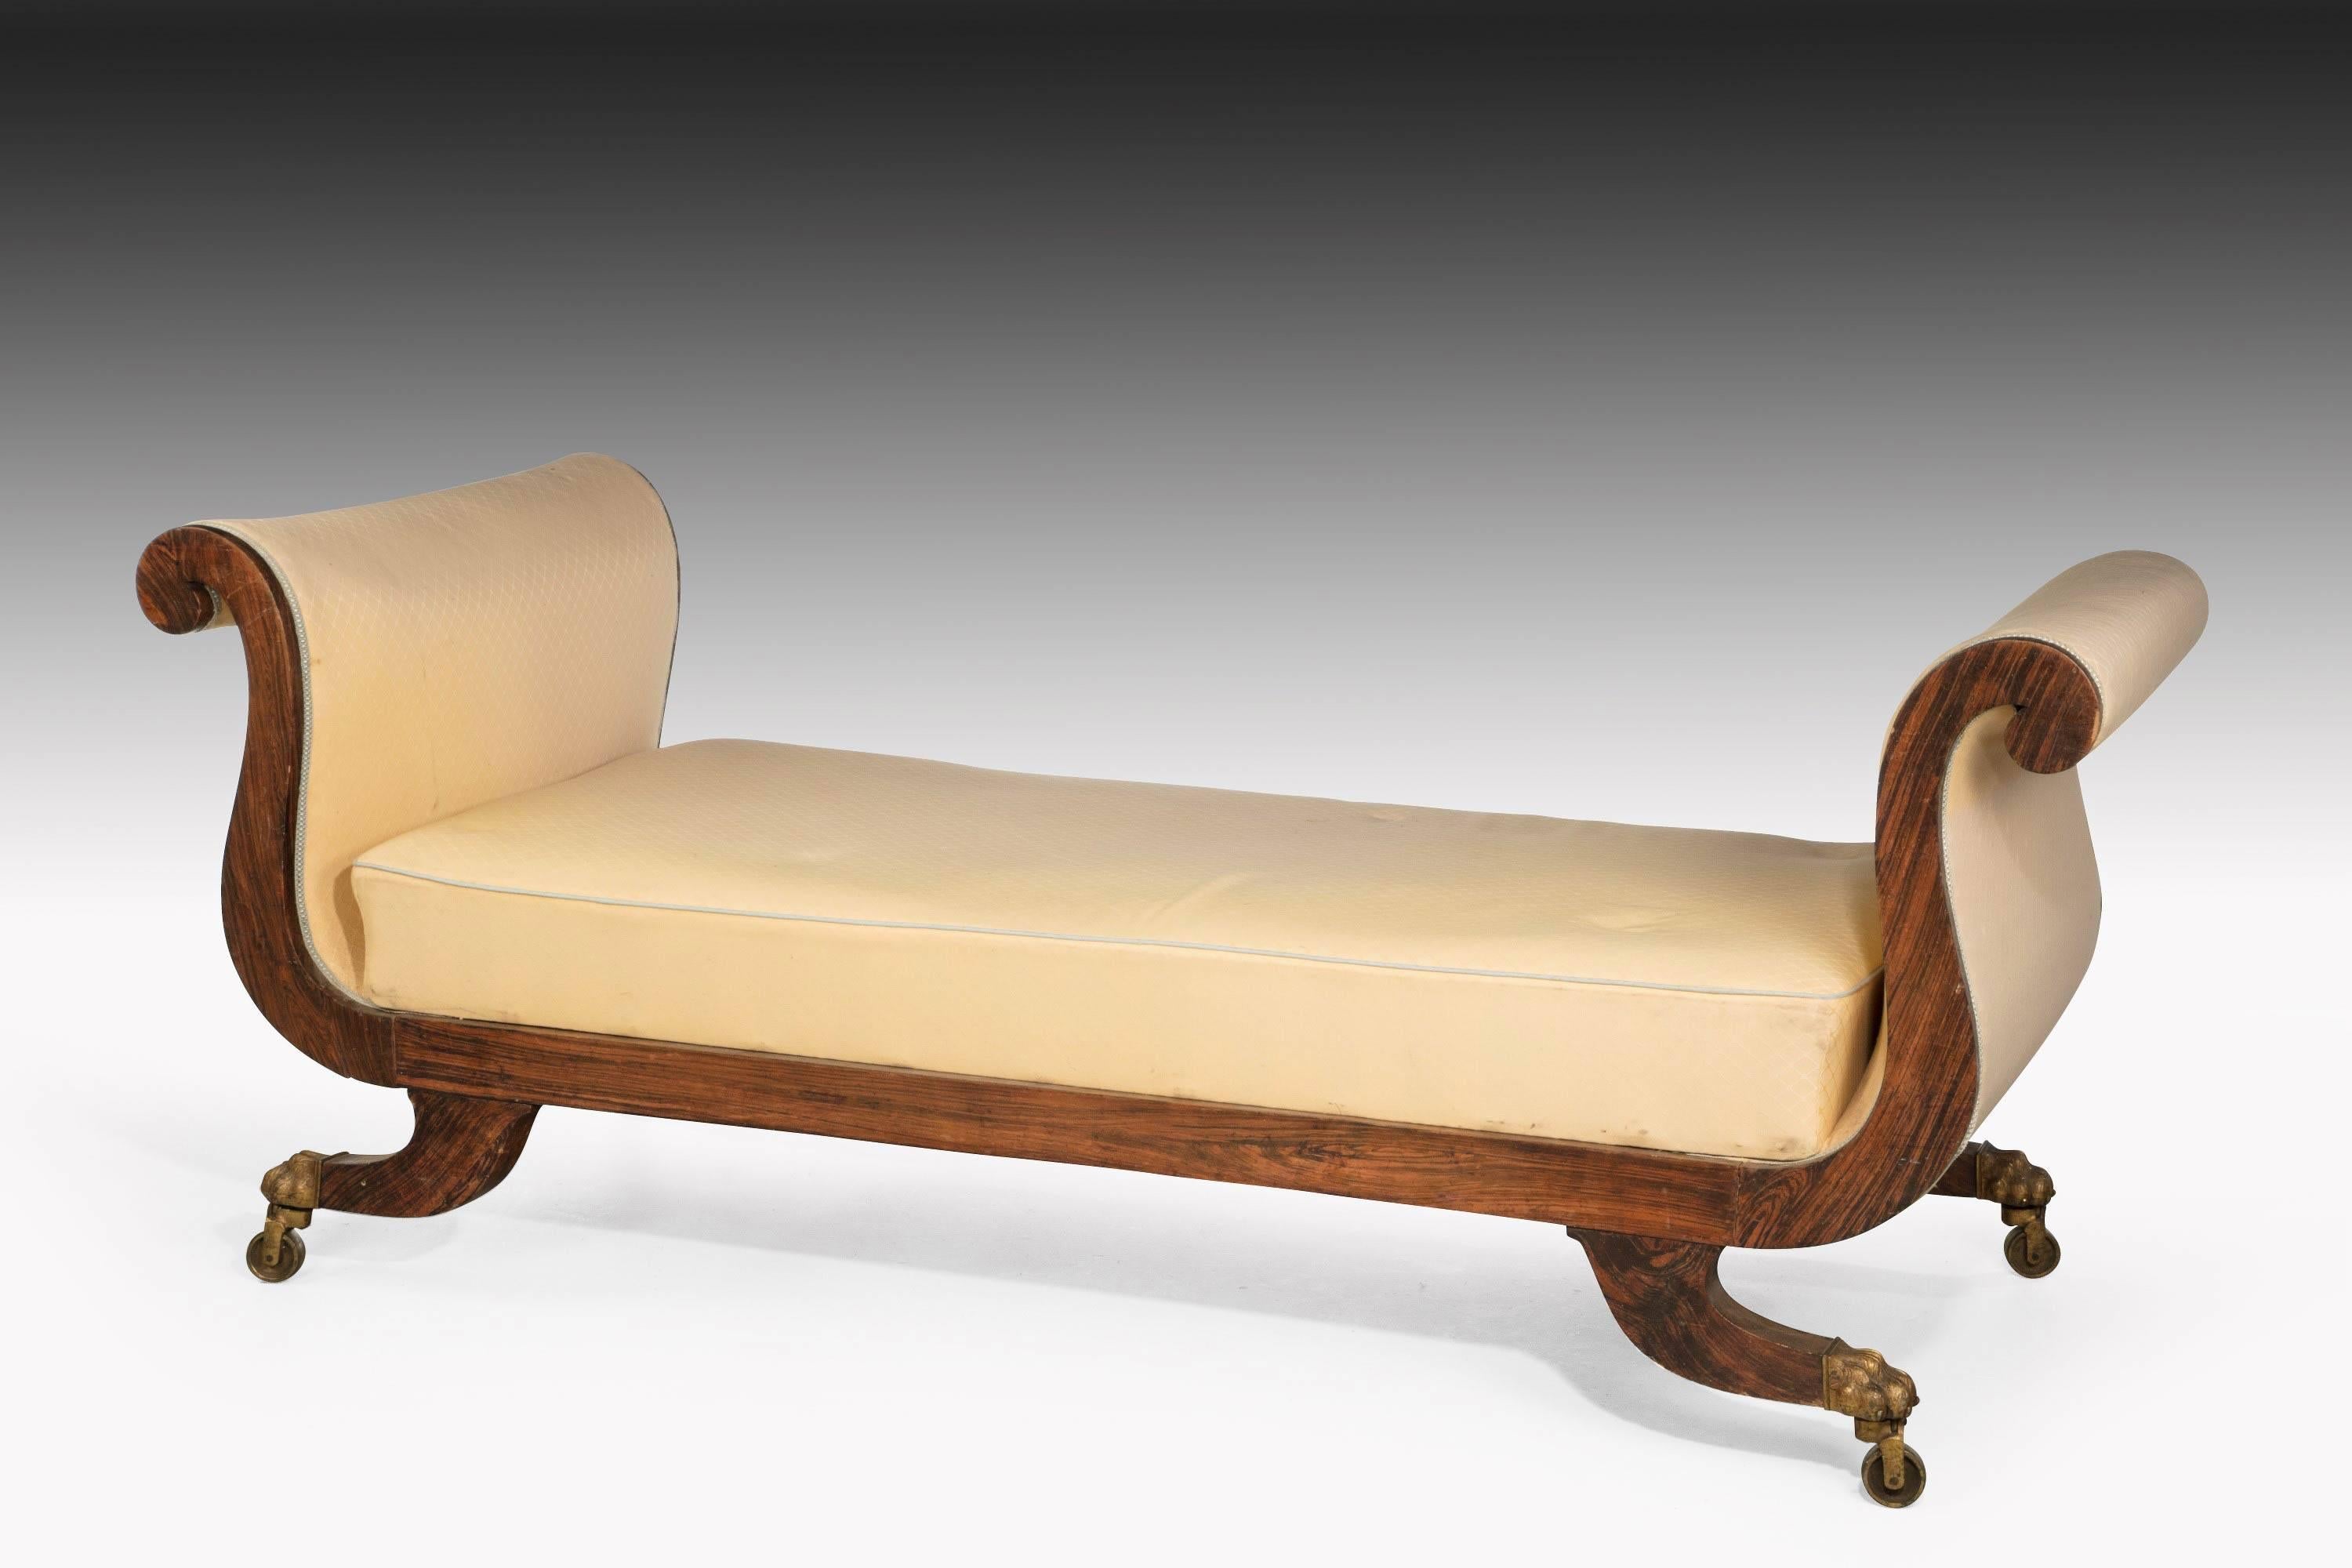 An unusually large Regency period end support sofa with elegant swan neck uprights. The sabre legs retaining the original shoes and castors. Very well figured and excellent overall condition.